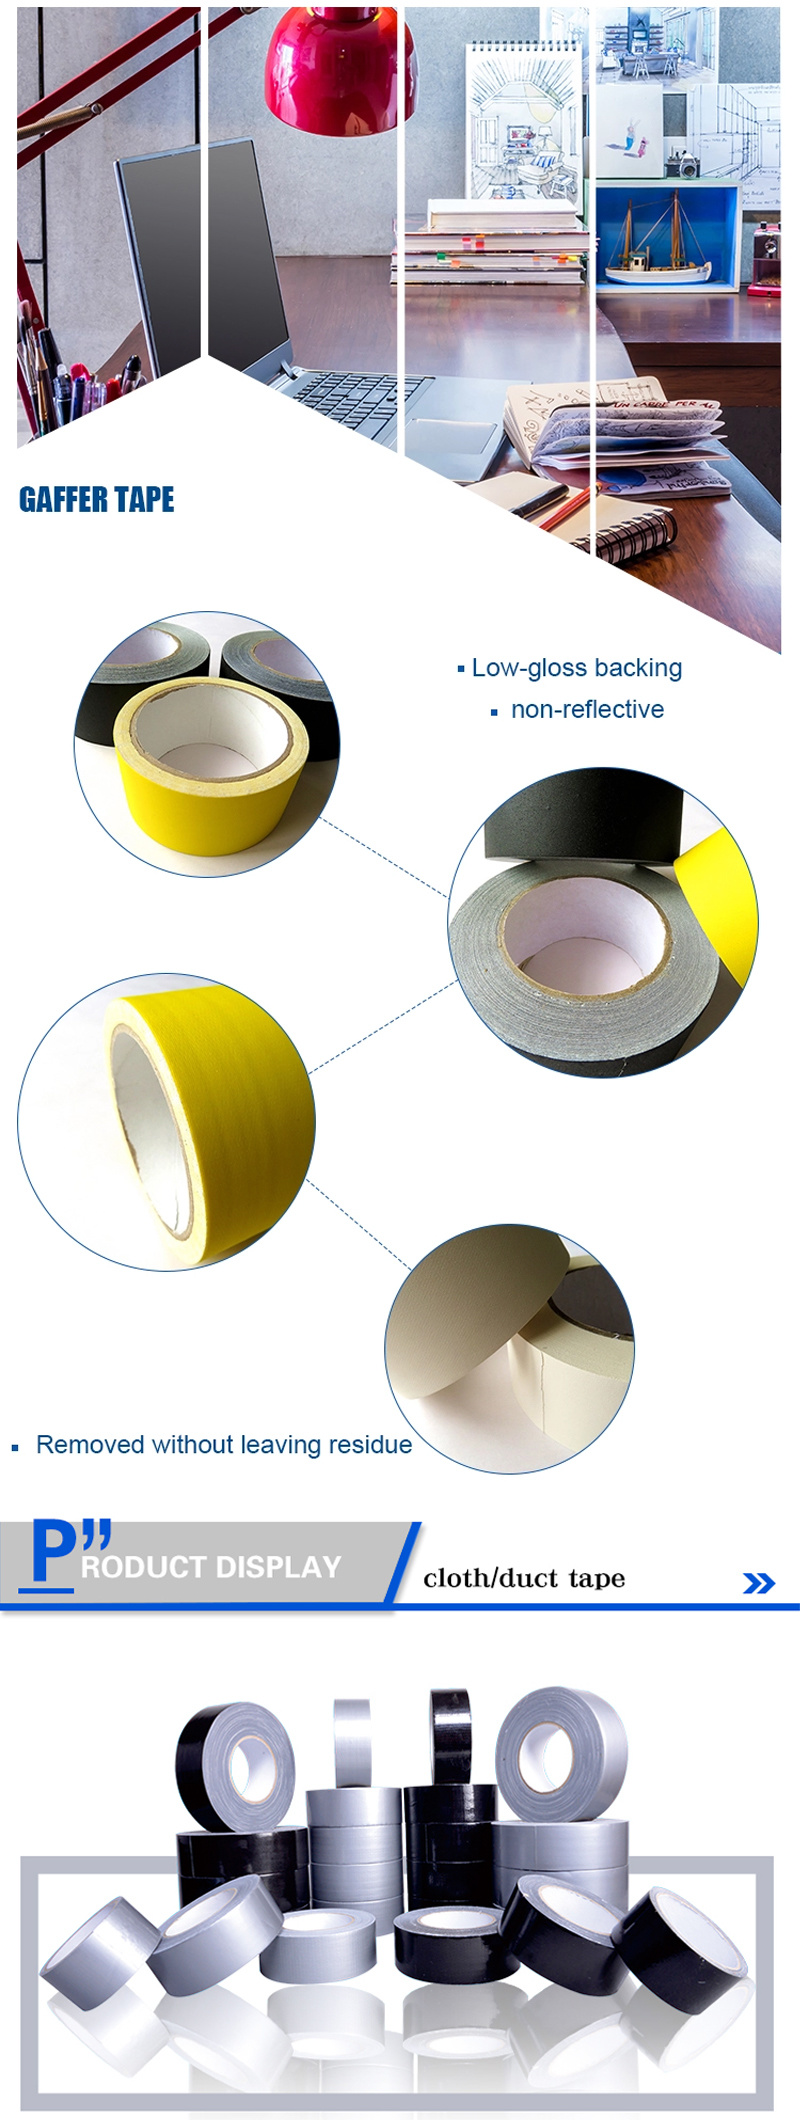 SGS Certificated Colored Custom Printed PVC Cloth Duct Tape in Jumbo Roll